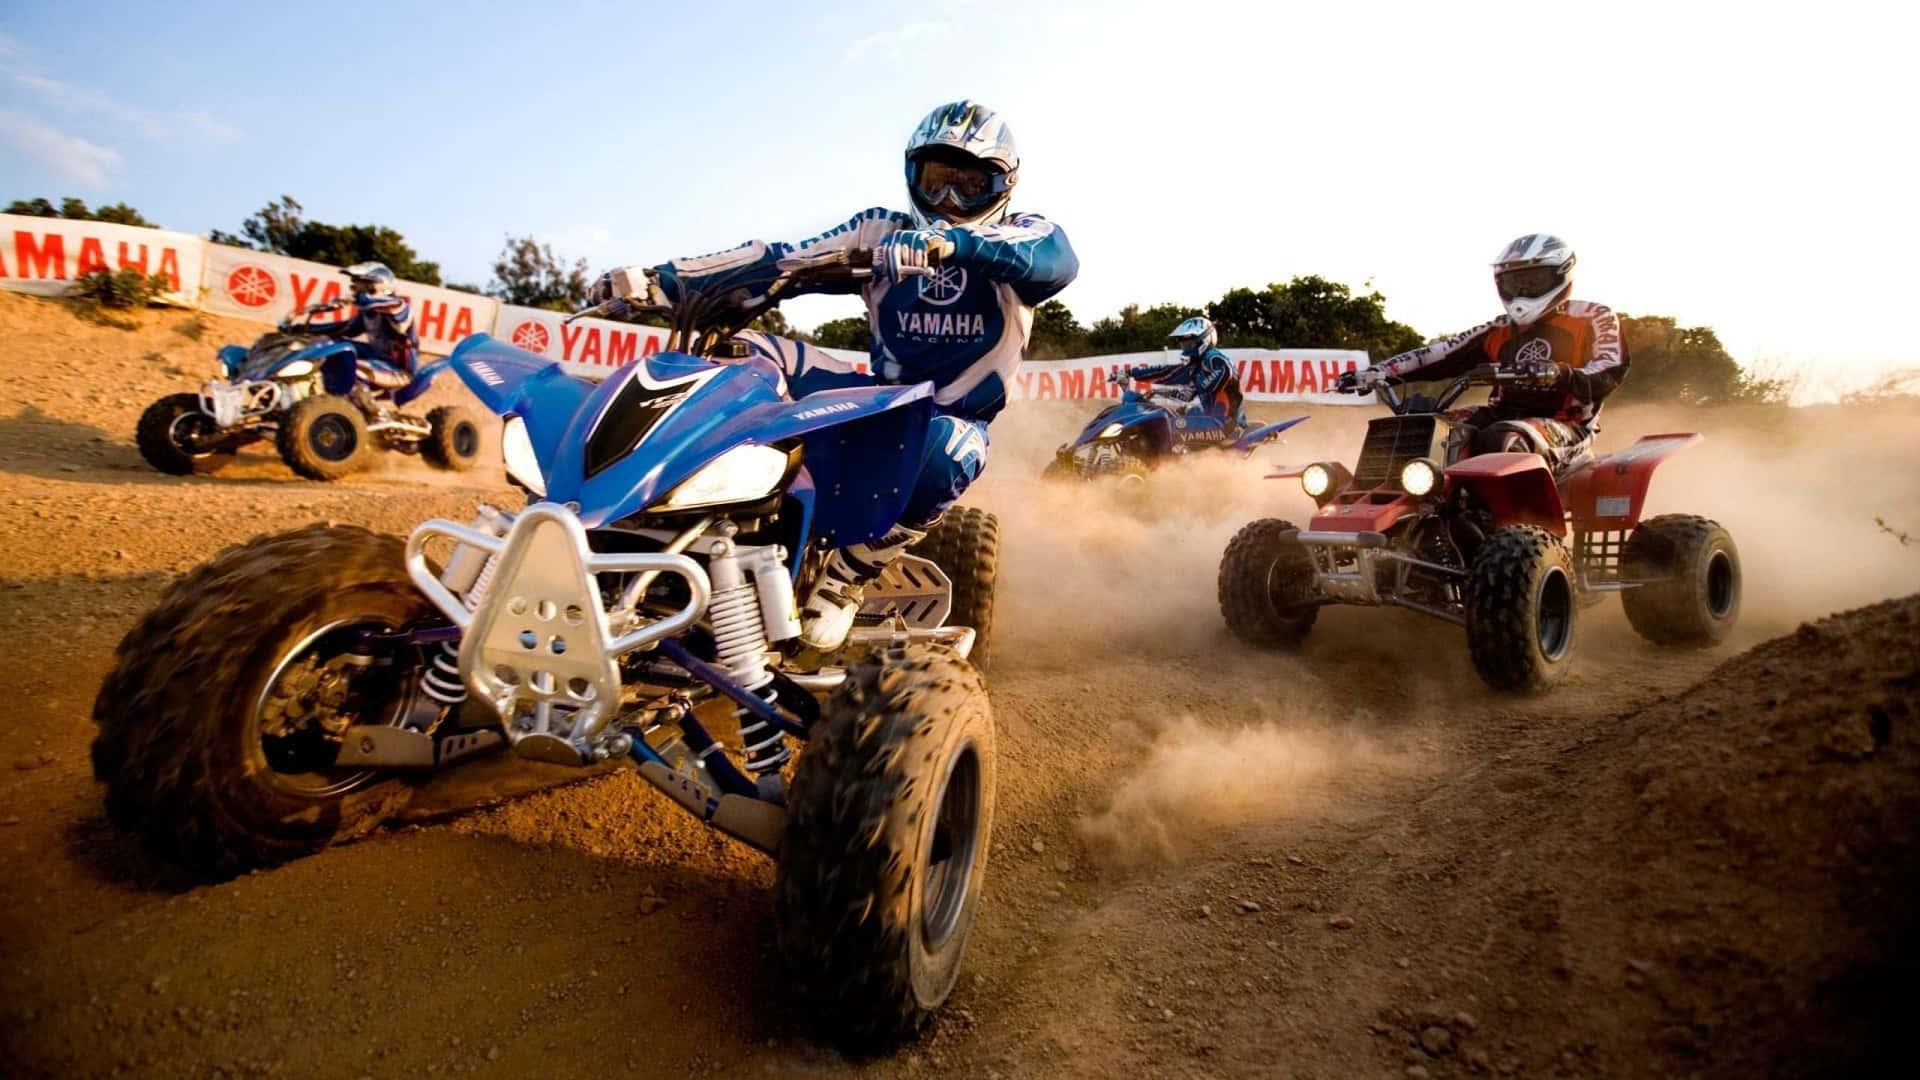 A T V Racing Action Dust Trail.jpg Wallpaper